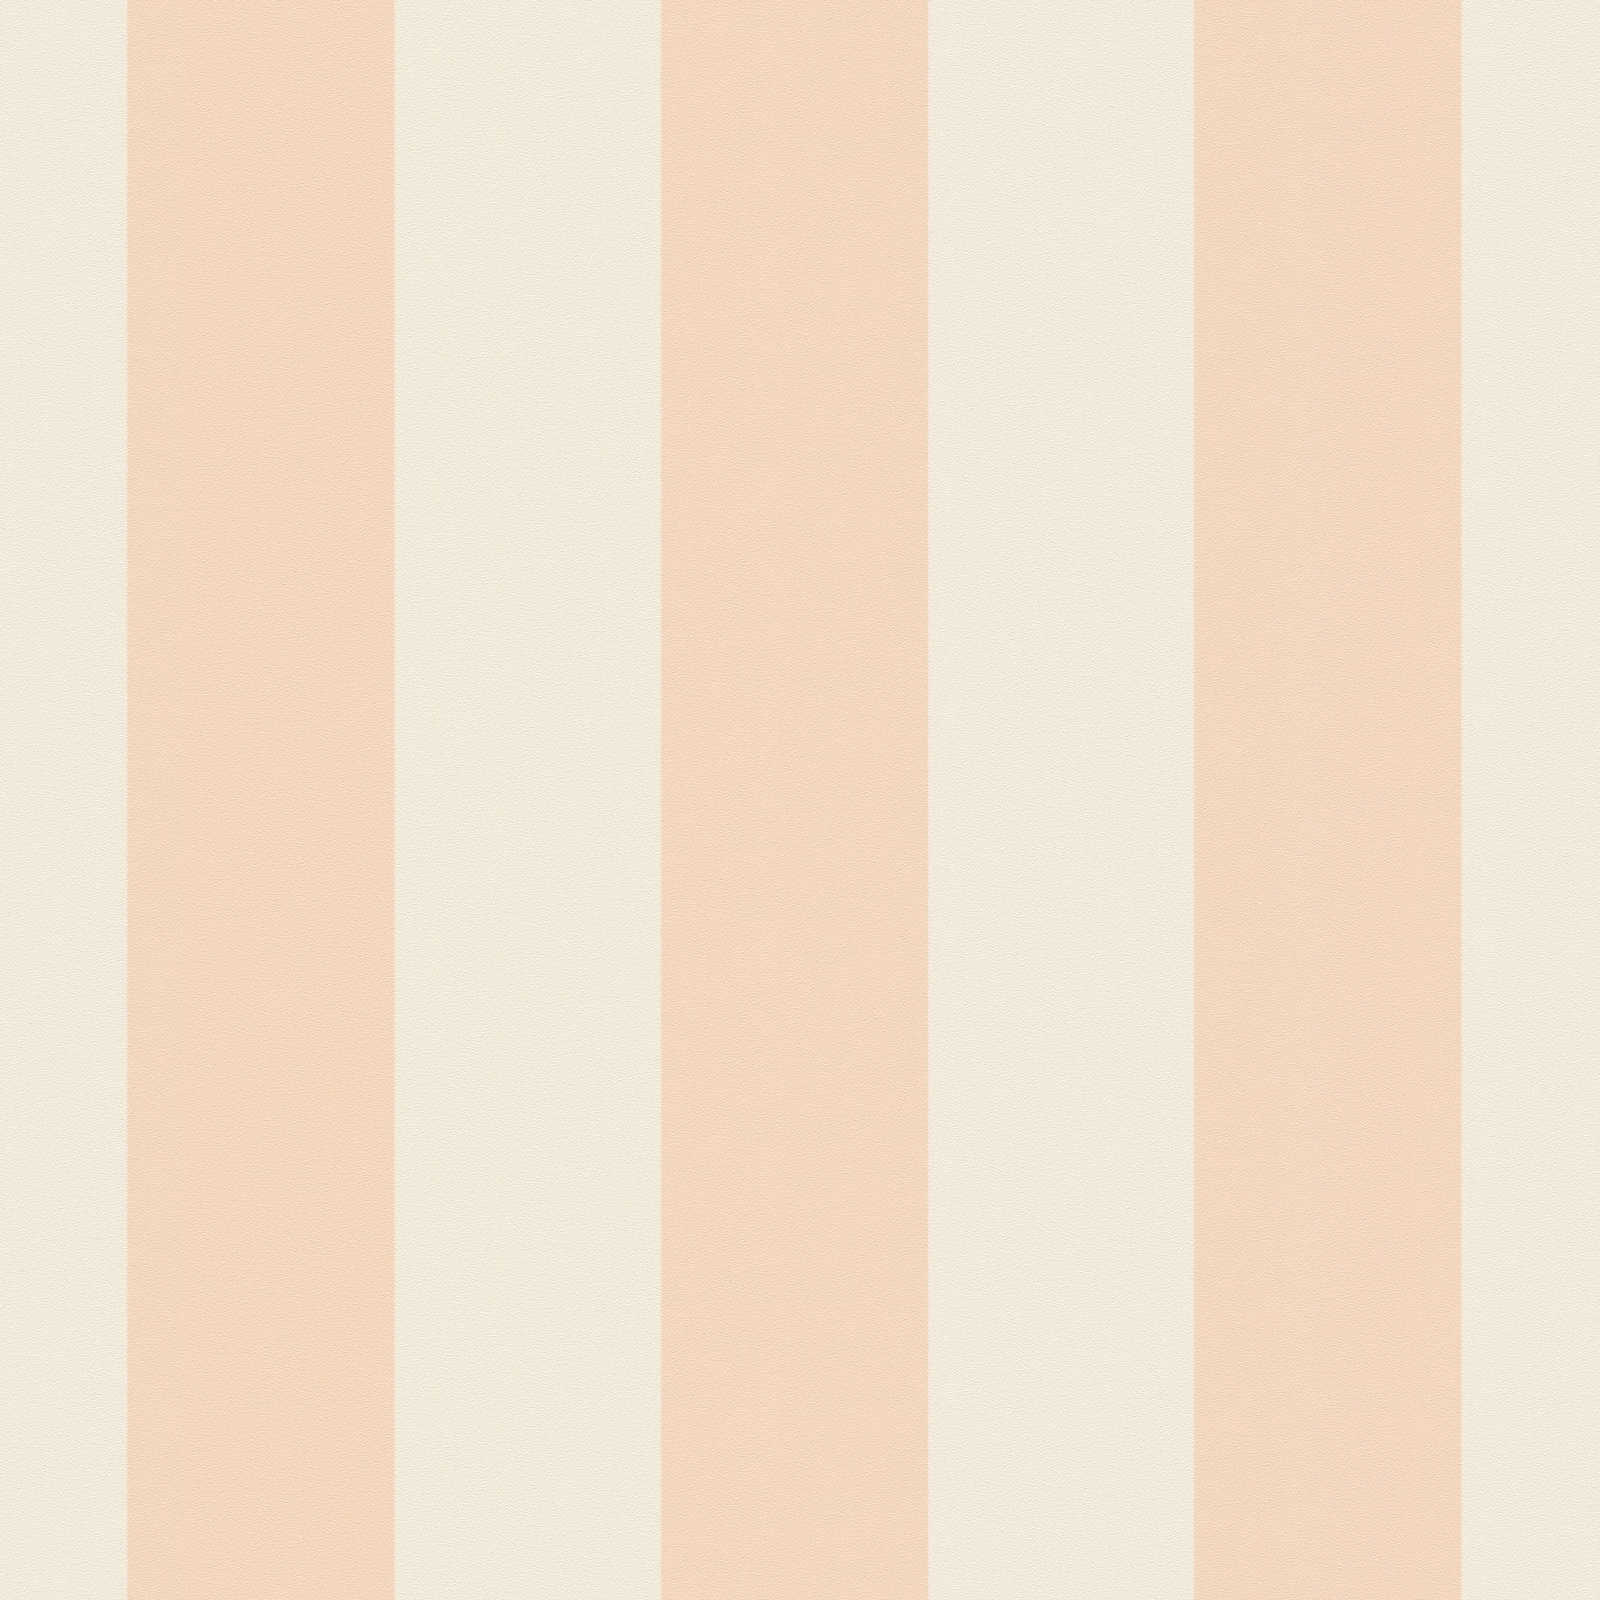             Non-woven wallpaper with block stripes in soft shades - cream, pink
        